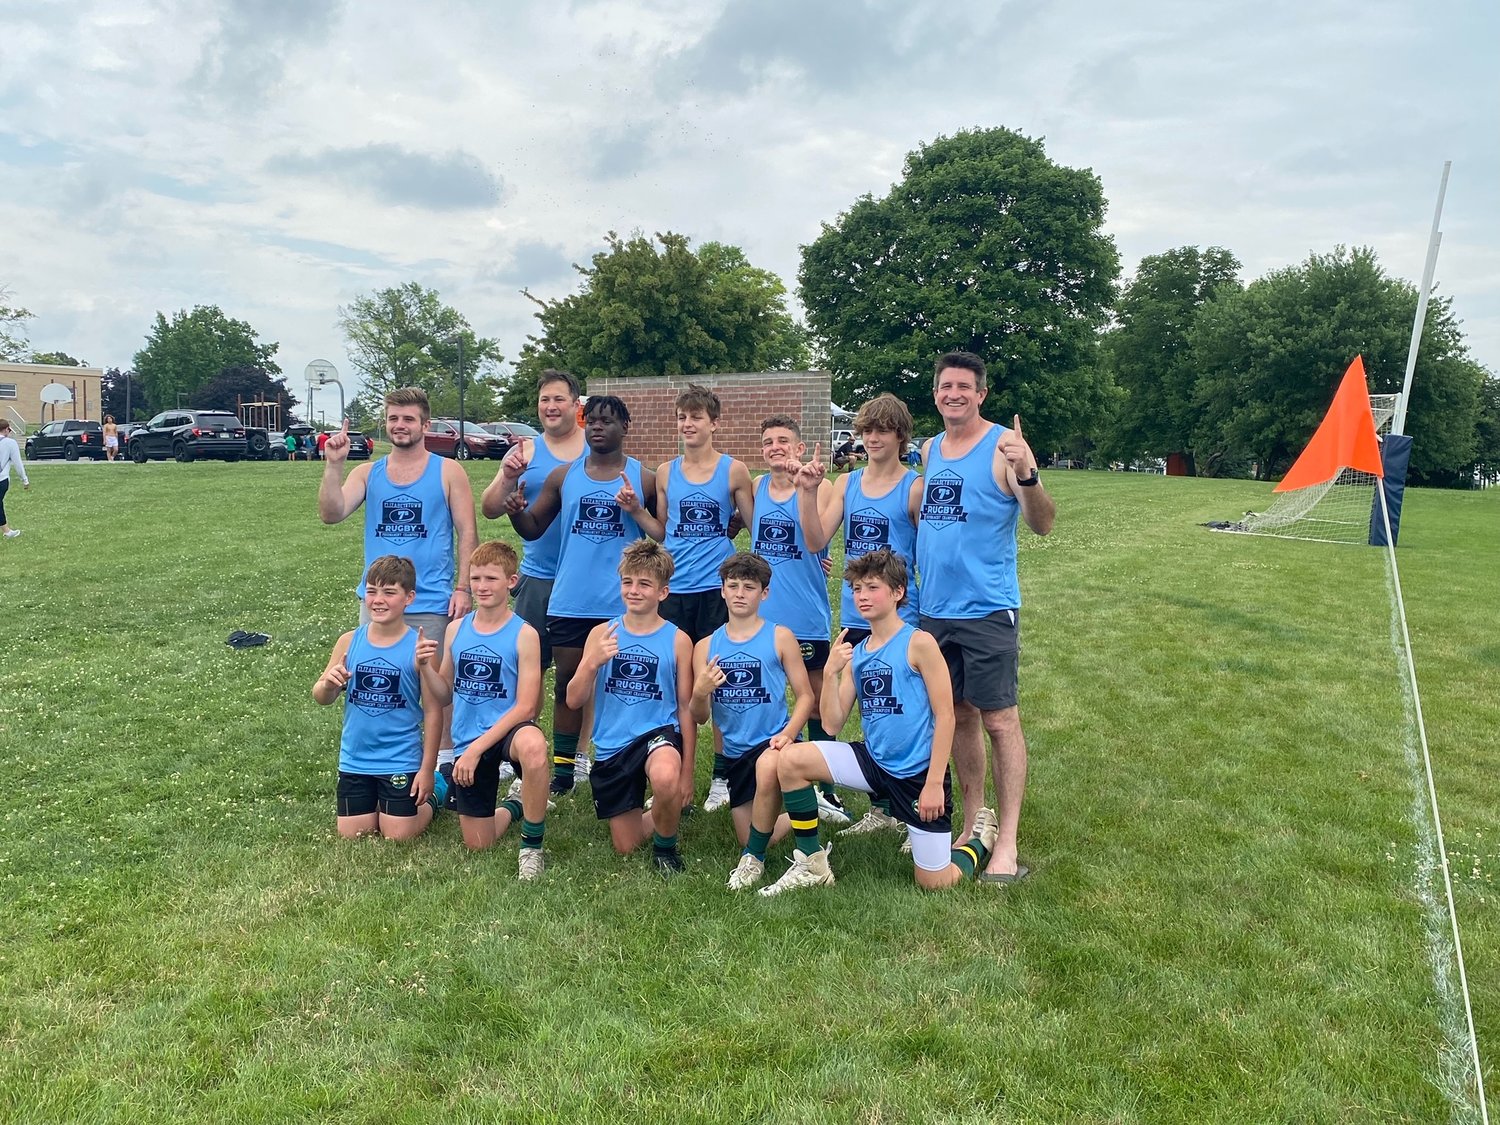 Members of the Doylestown Rugby Academy youth team wear their championship tank tops. From left are: kneeling, Sean Harding, Sean Leuthe, Jackson Reilly, Liam Hoey, Louie Cipollo; standing, coach Kevin Reilly Jr., coach Lou Cipollo, Gavin Graham, Mason Darrows, Brendan Bieker, Davis Parisi and coach Kevin Reilly